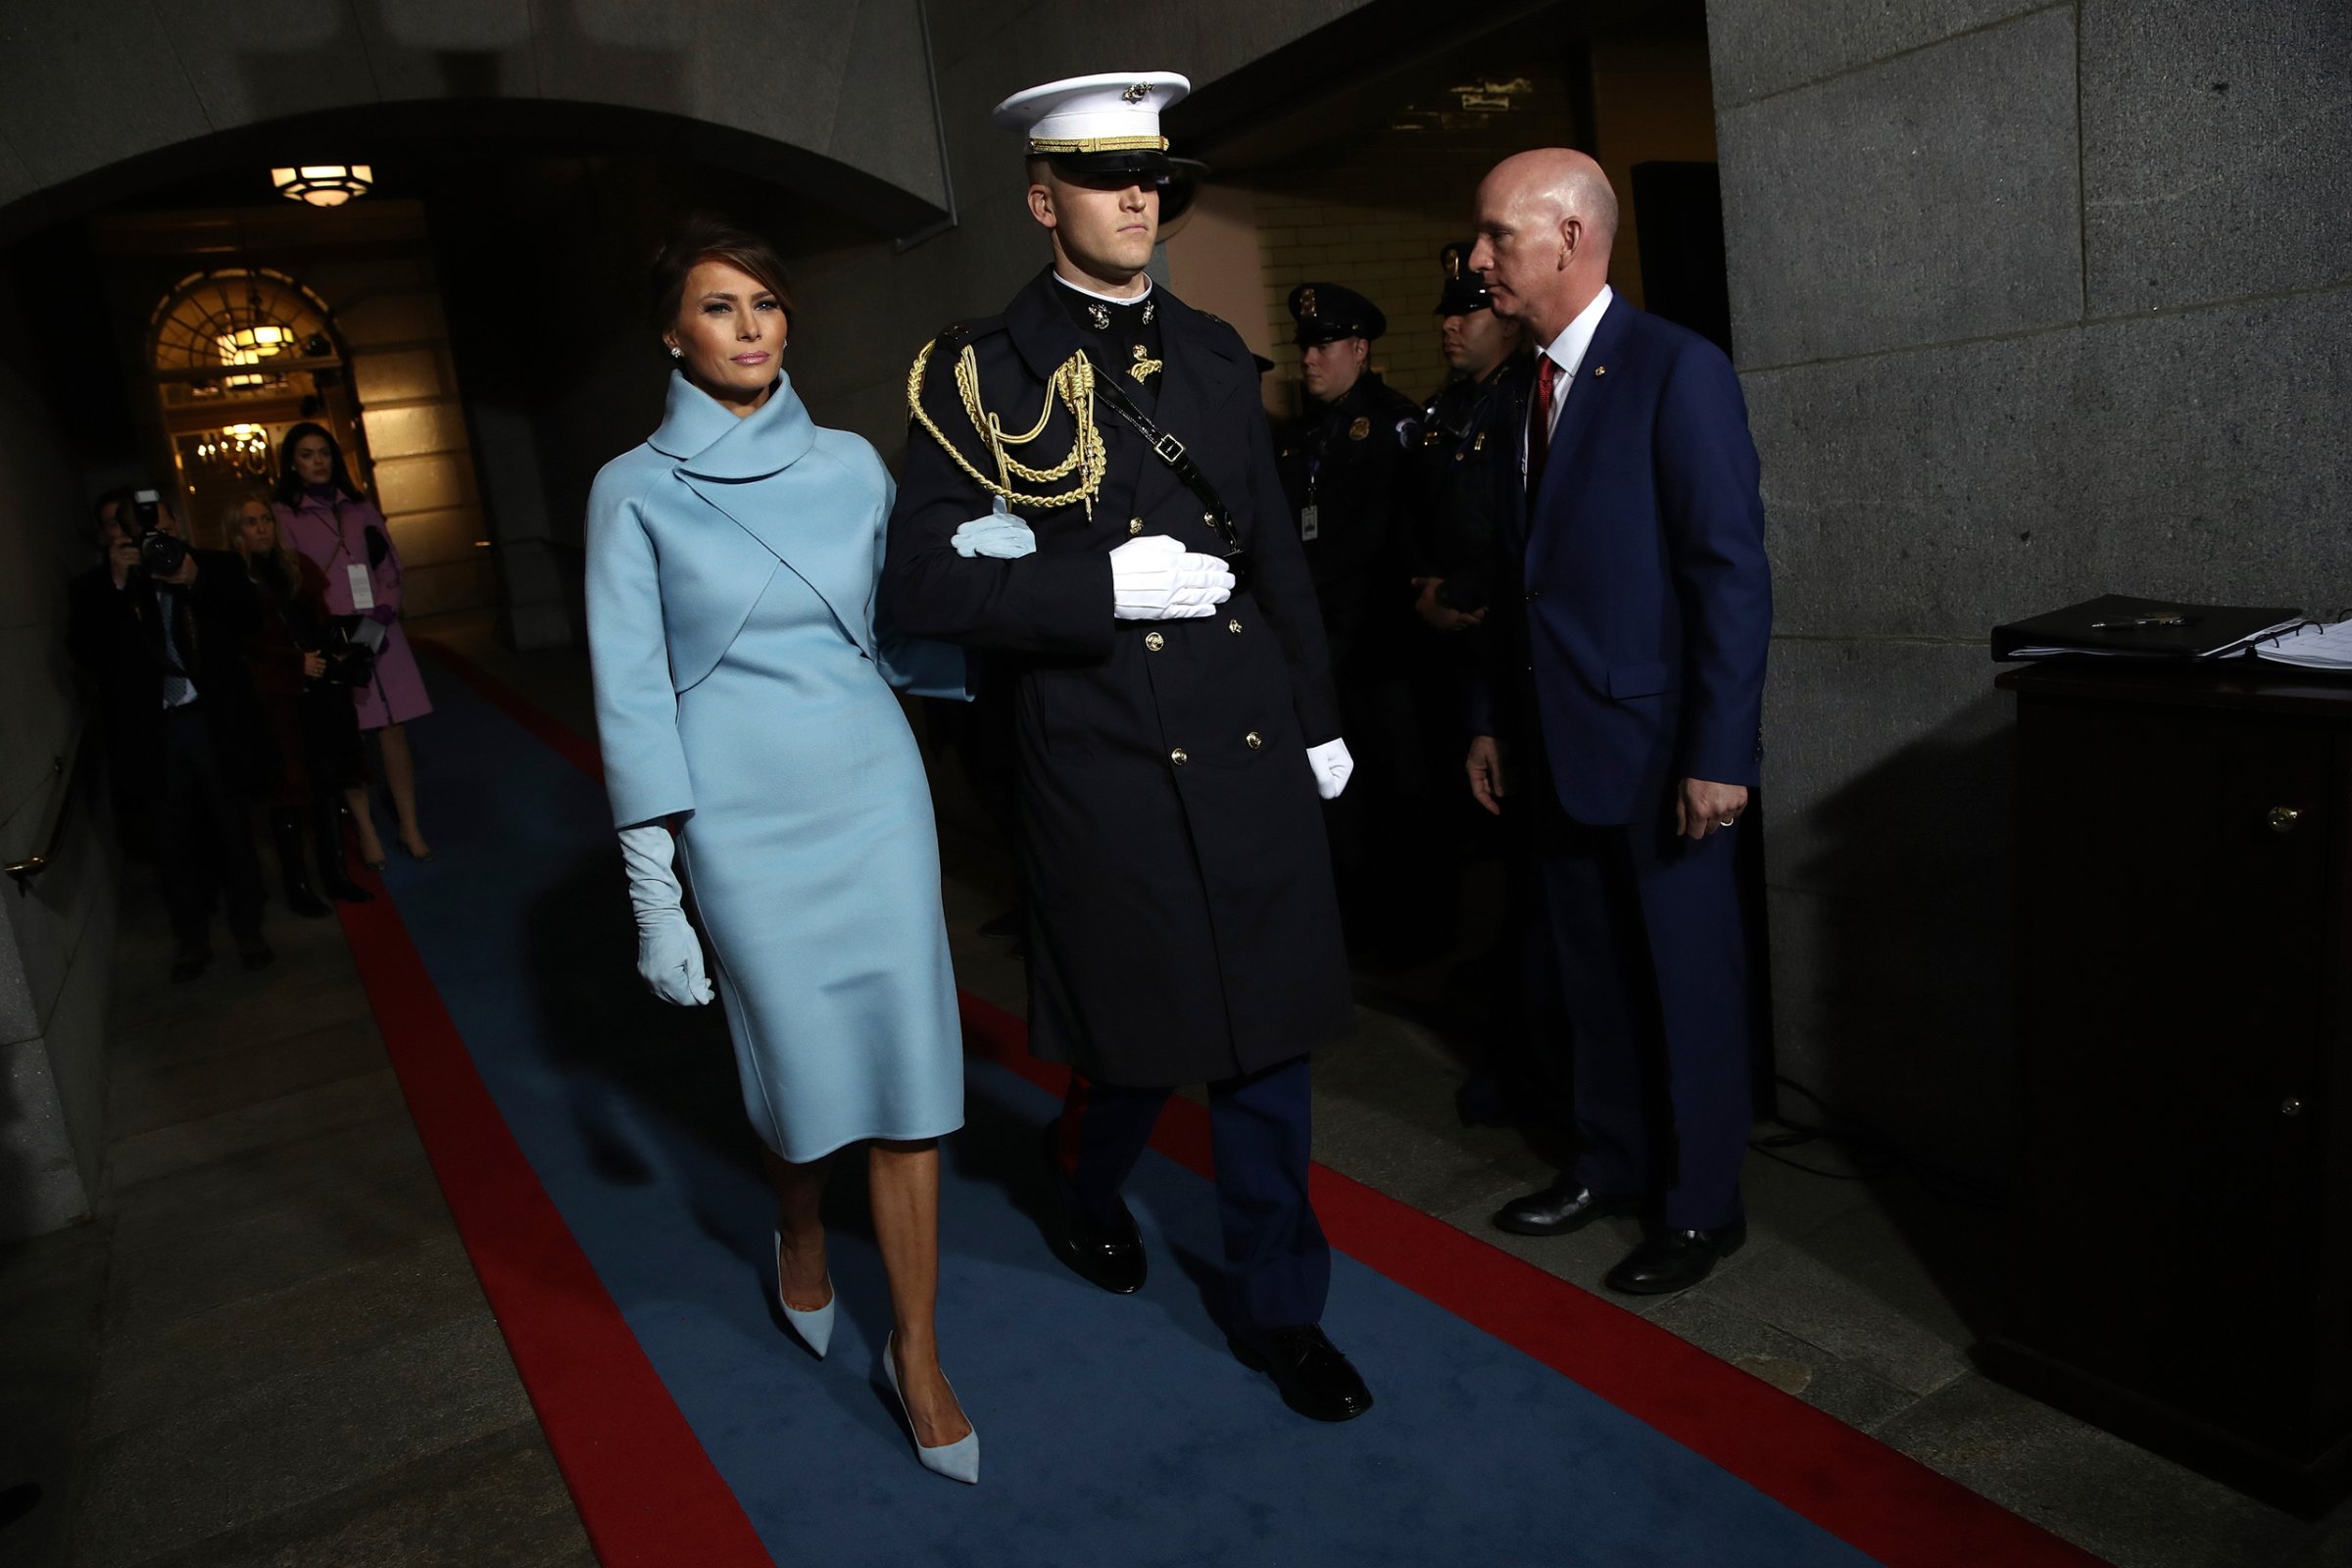 Melania Trump arrives on the West Front of the U.S. Capitol on January 20, 2017 in Washington, DC. REUTERS/Win McNamee/Pool - RTSWLCM